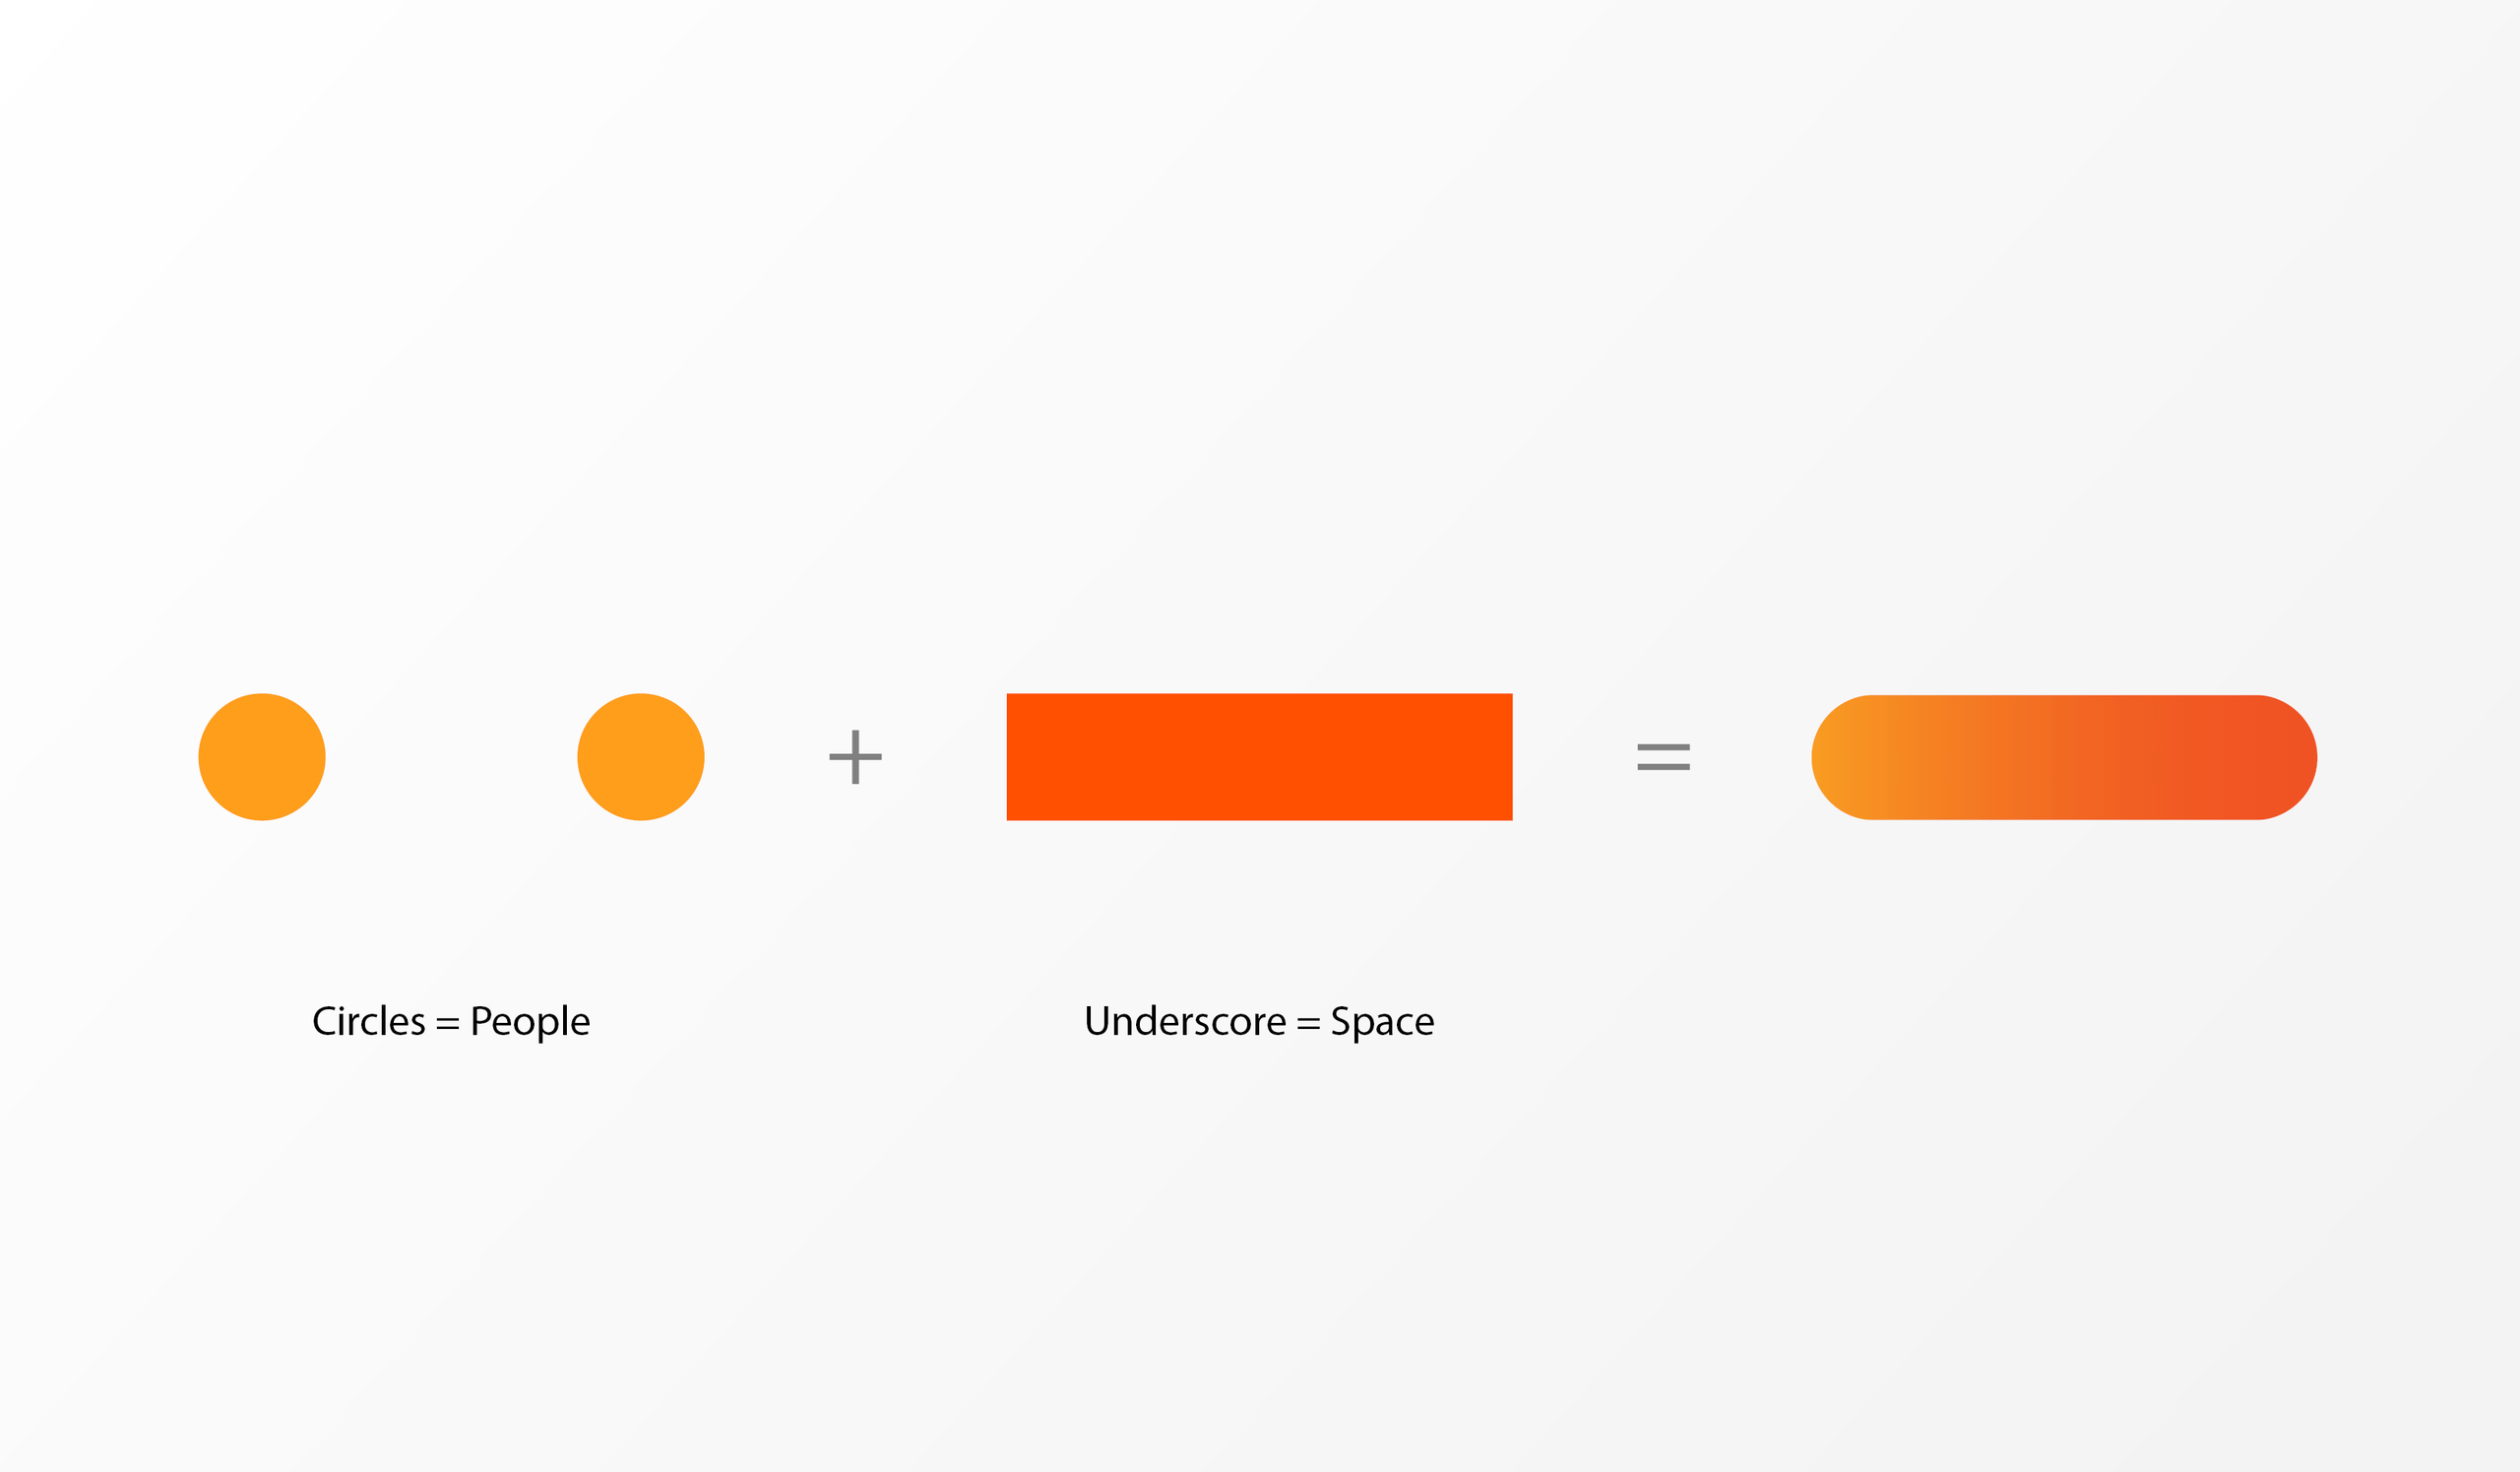 two light orange dots with the caption "Circles = People", a + symbol, a darker orange rectangle with the caption "Underscore = Space", an = symbol, a combination of the two making a rectangle with rounded edges in orange ombre